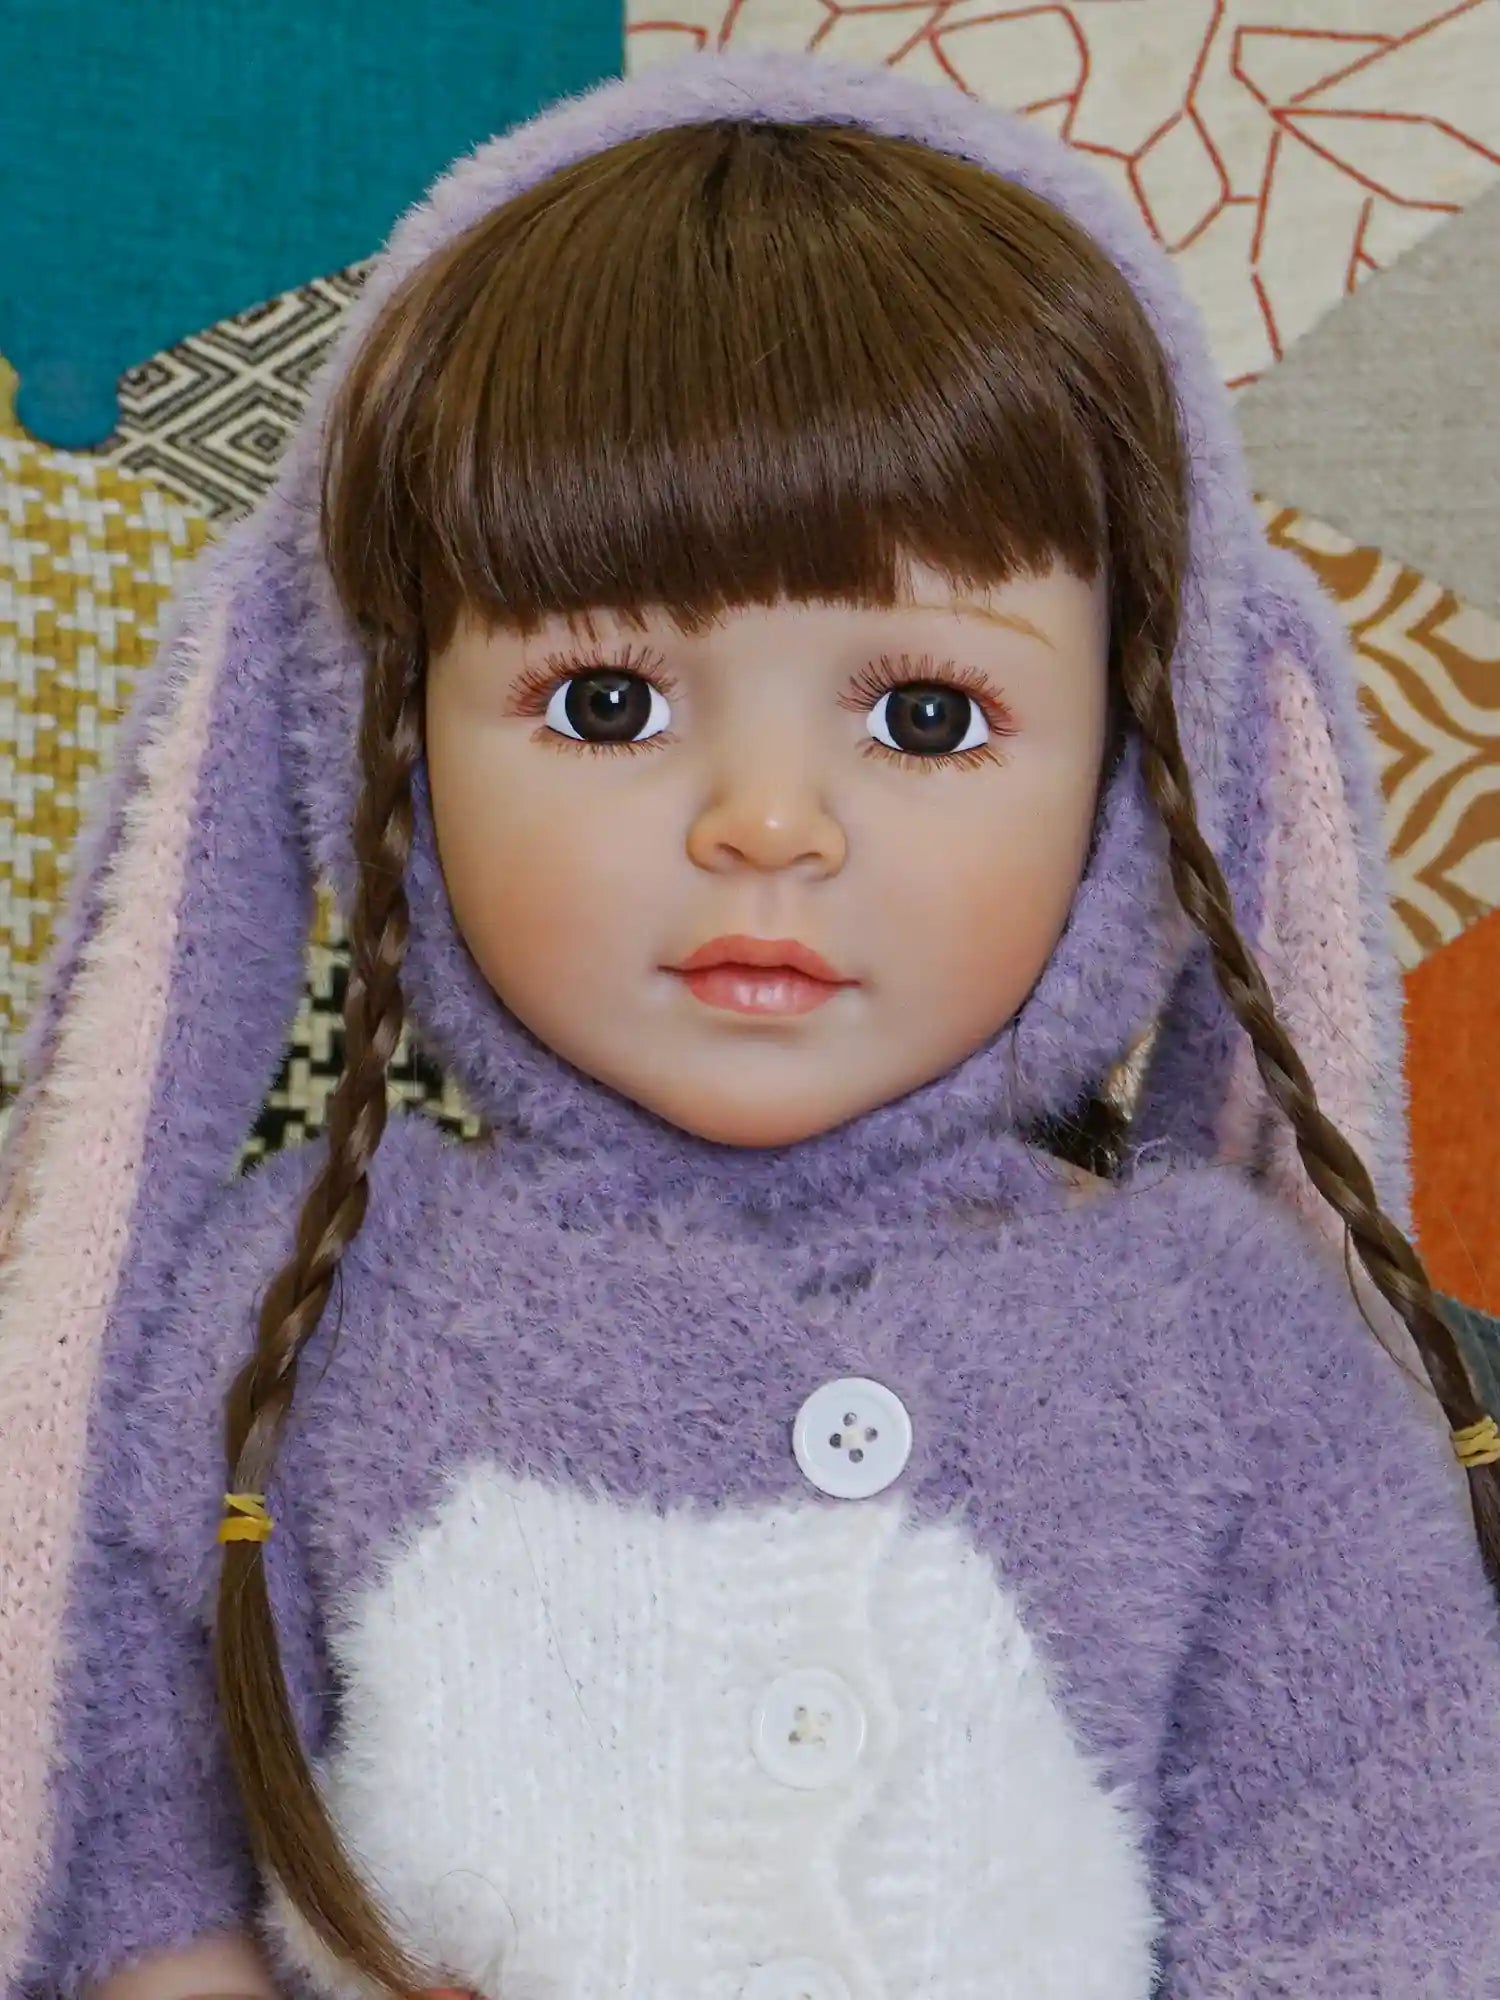 A sitting doll with a realistic face, brown hair in braids, and dressed in a textured purple bunny suit, surrounded by a learning clock and white flowers.